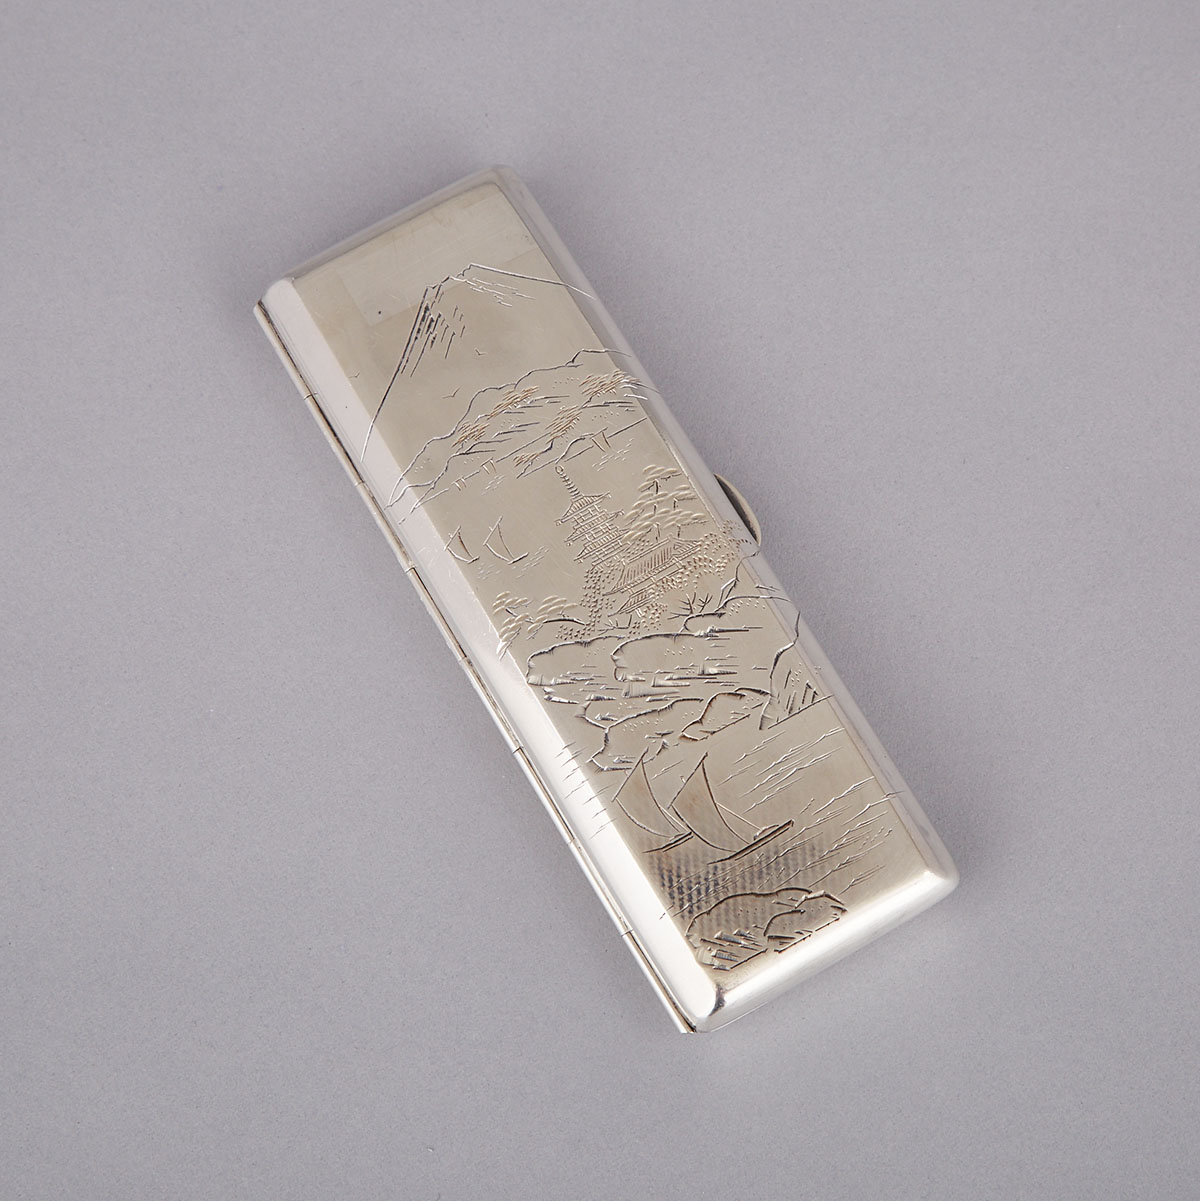 Japanese Engraved Silver Cigarette Case, early 20th century